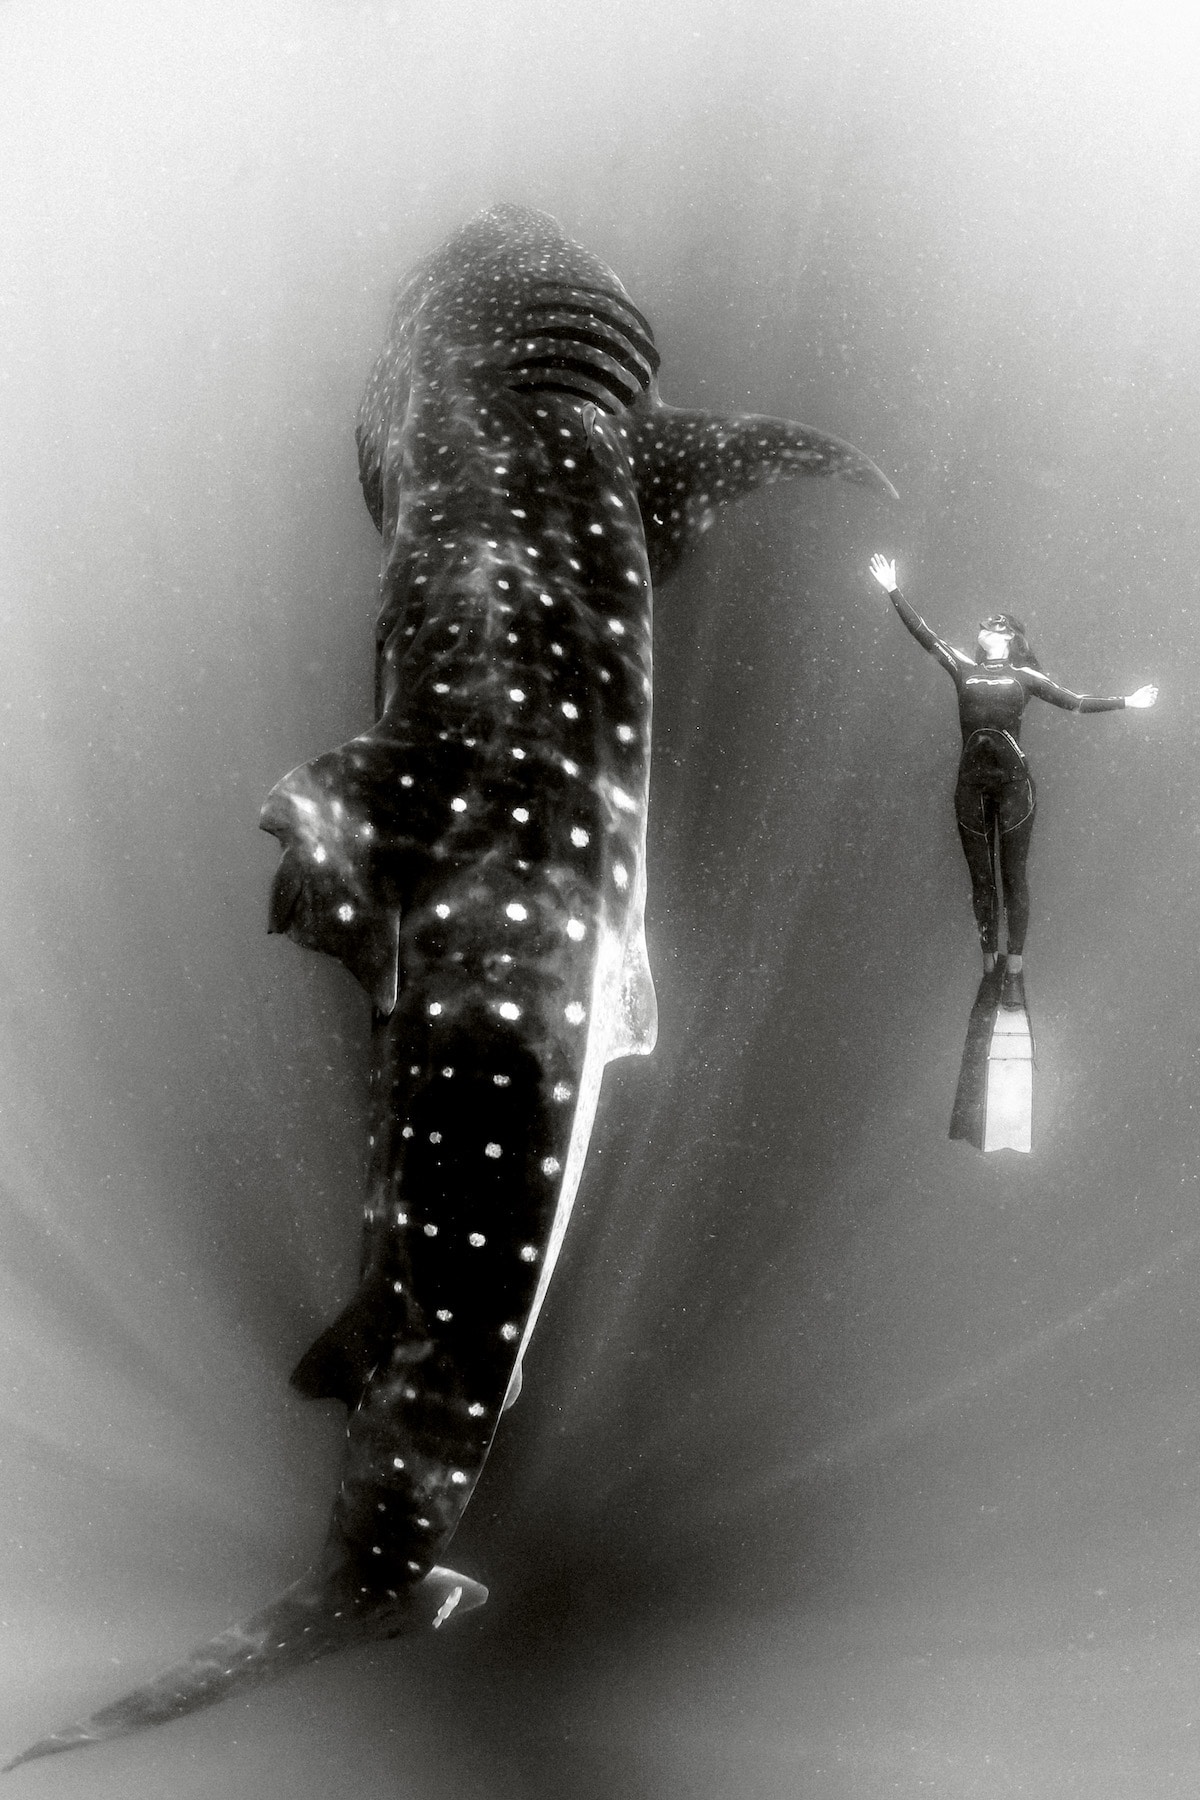 Black and White Underwater Photography by Christian Vizl